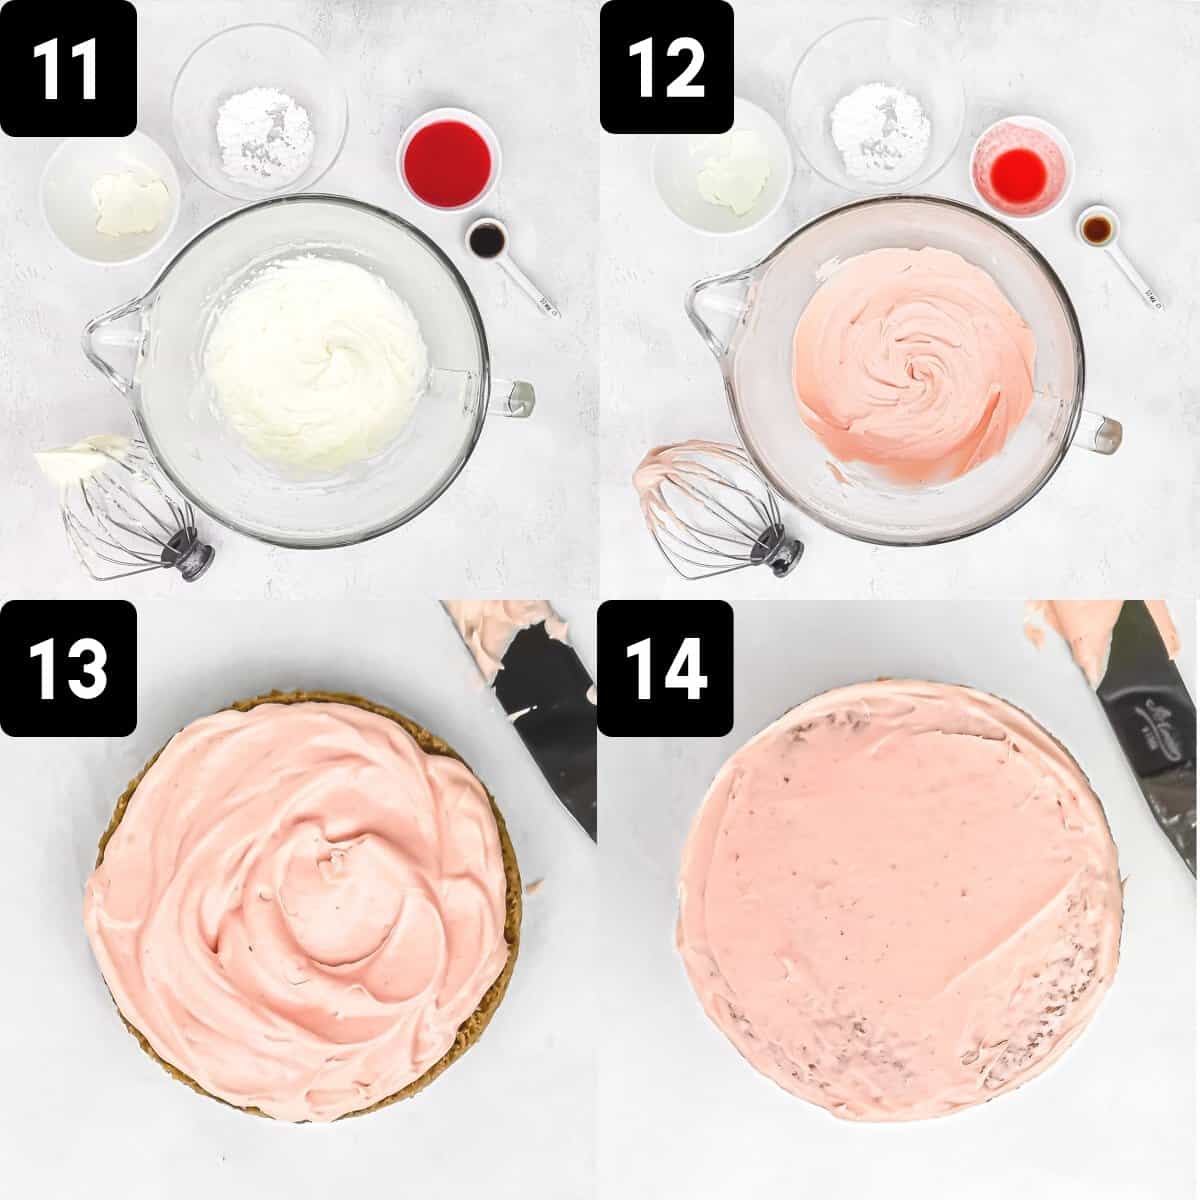 Buttercream process: Cream butter, add powdered sugar, strawberry puree, vanilla and mix. Fill the cake and apply a crumb coat.